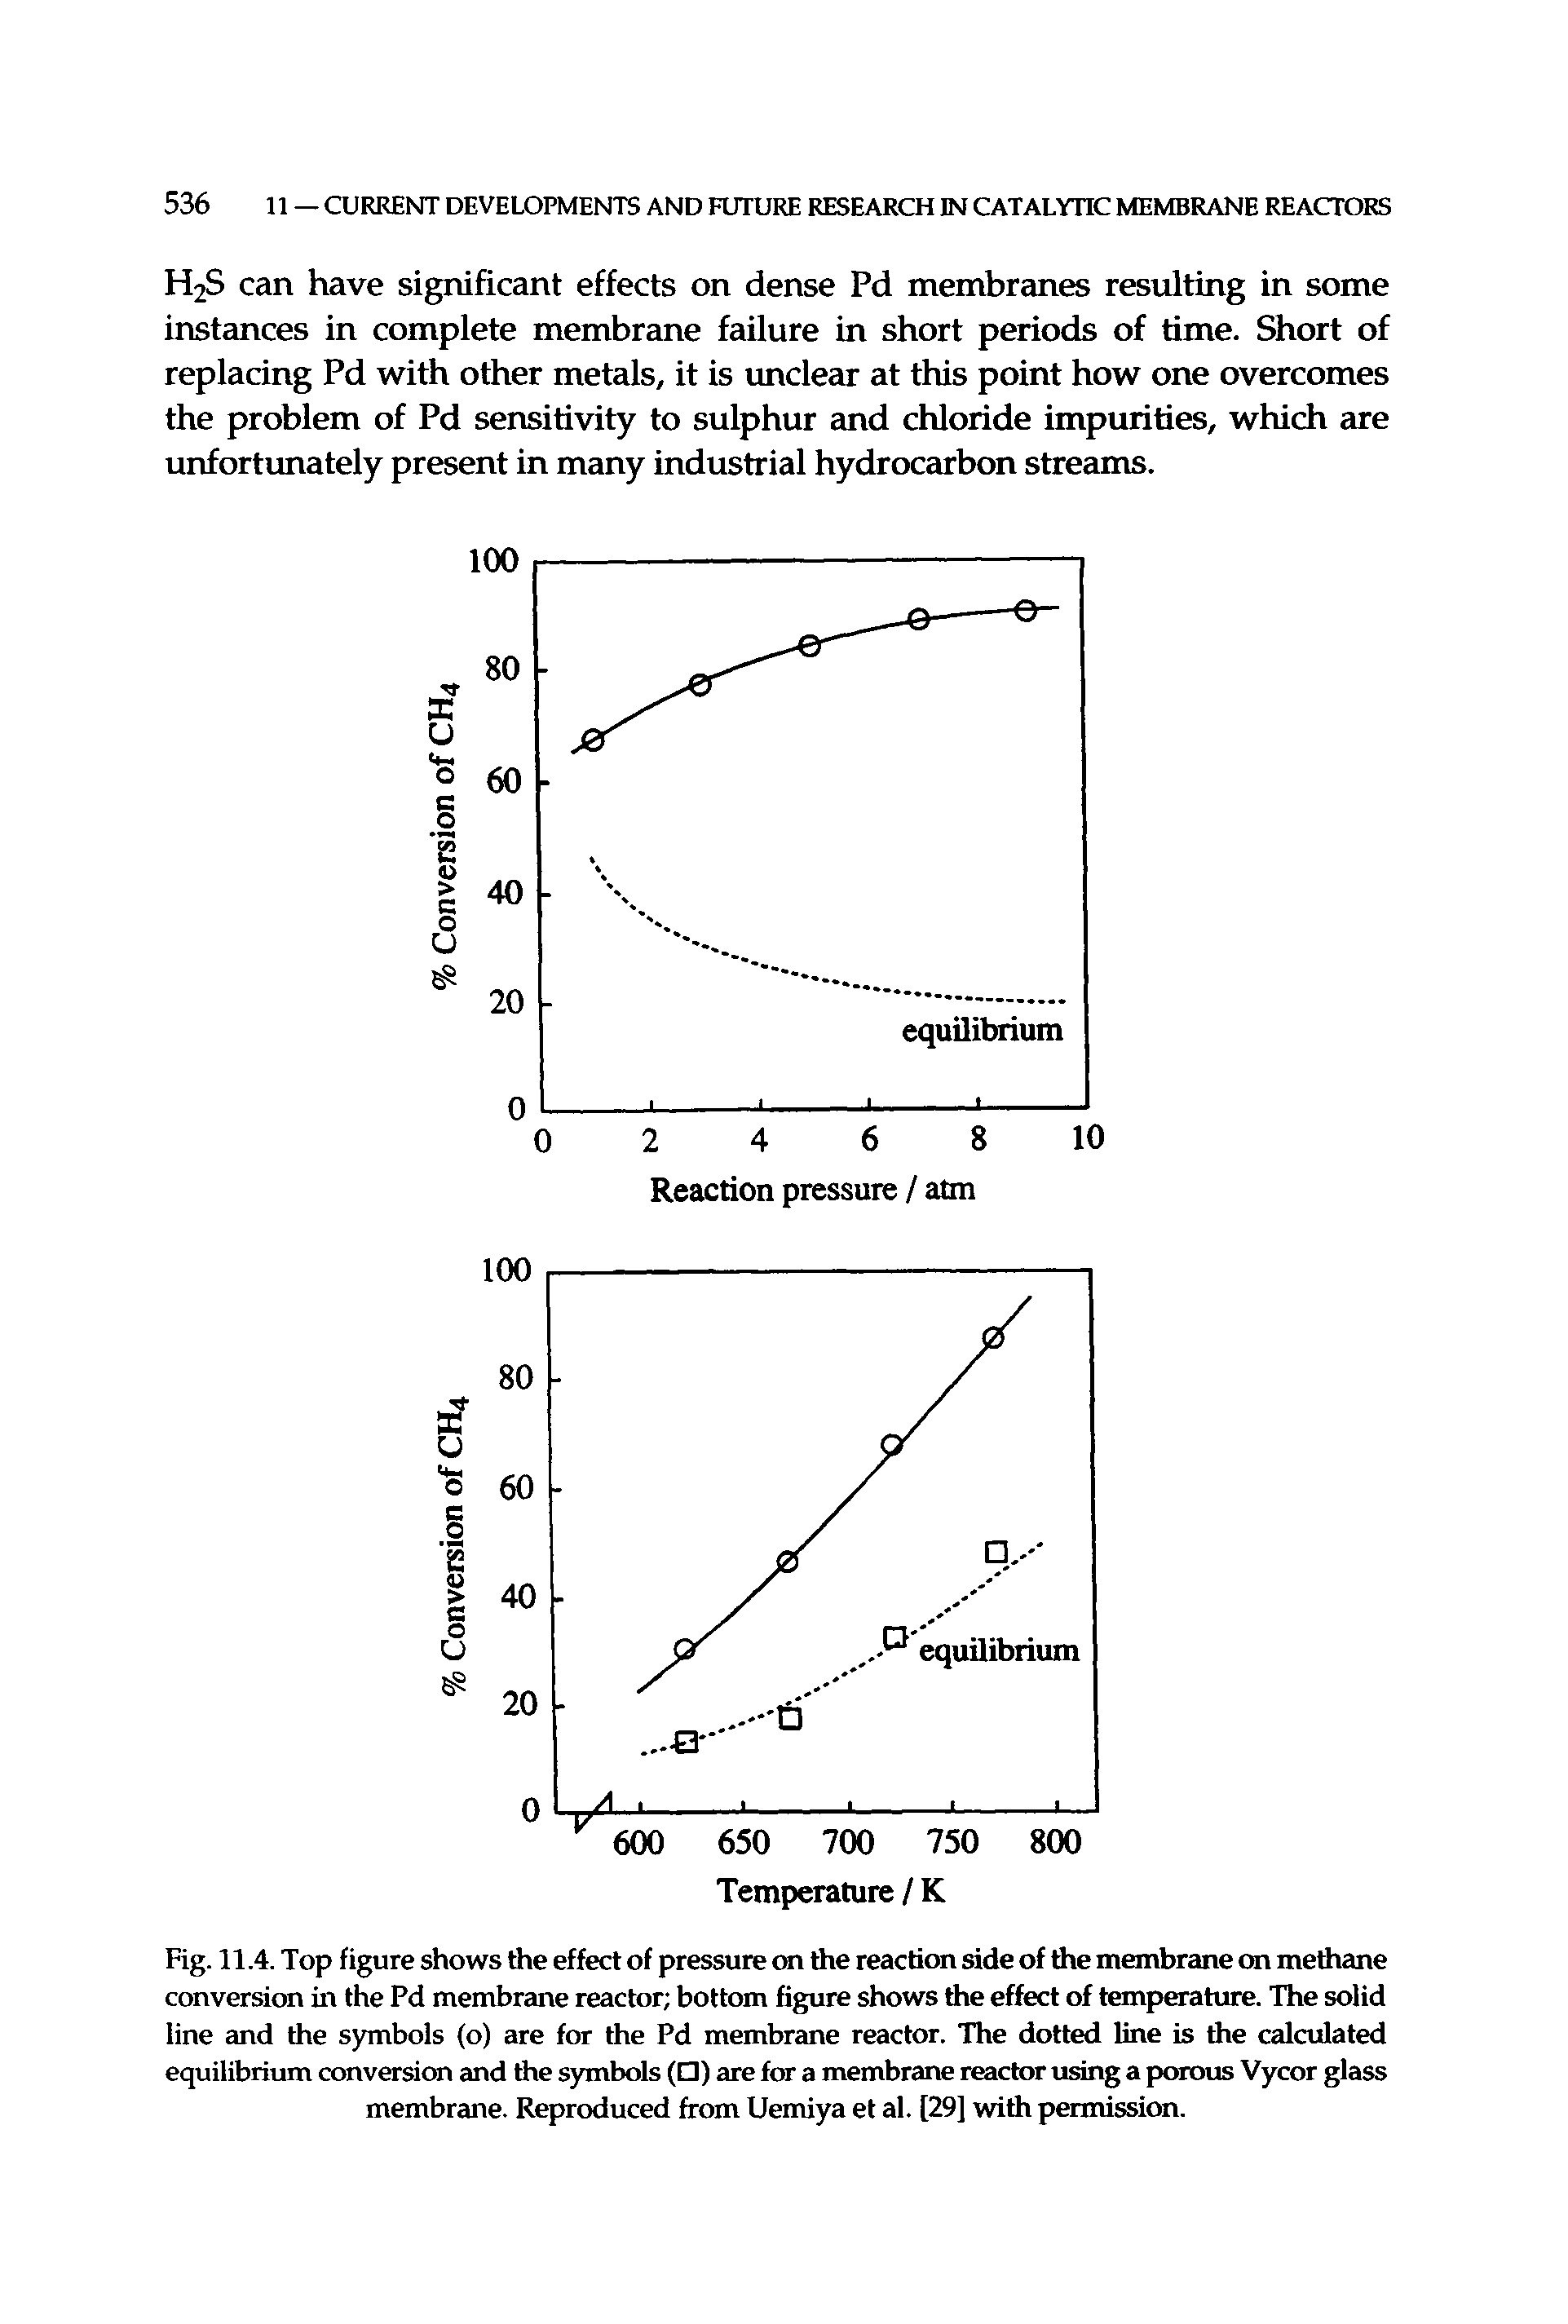 Fig. 11.4. Top figure shows the effect of pressure on the reaction side of the membrane cm methane conversion in the Pd membrane reactor bottom figure shows the effect of temperature. The solid line and the sjmtibols (o) are for the Pd membrane reactor. The dotted line is the calculated equilibrium conversion and the symbols ( ) are for a membrane reactor using a porous Vycor glass membrane. Reproduced from Uemiya et al. [29] with permission.